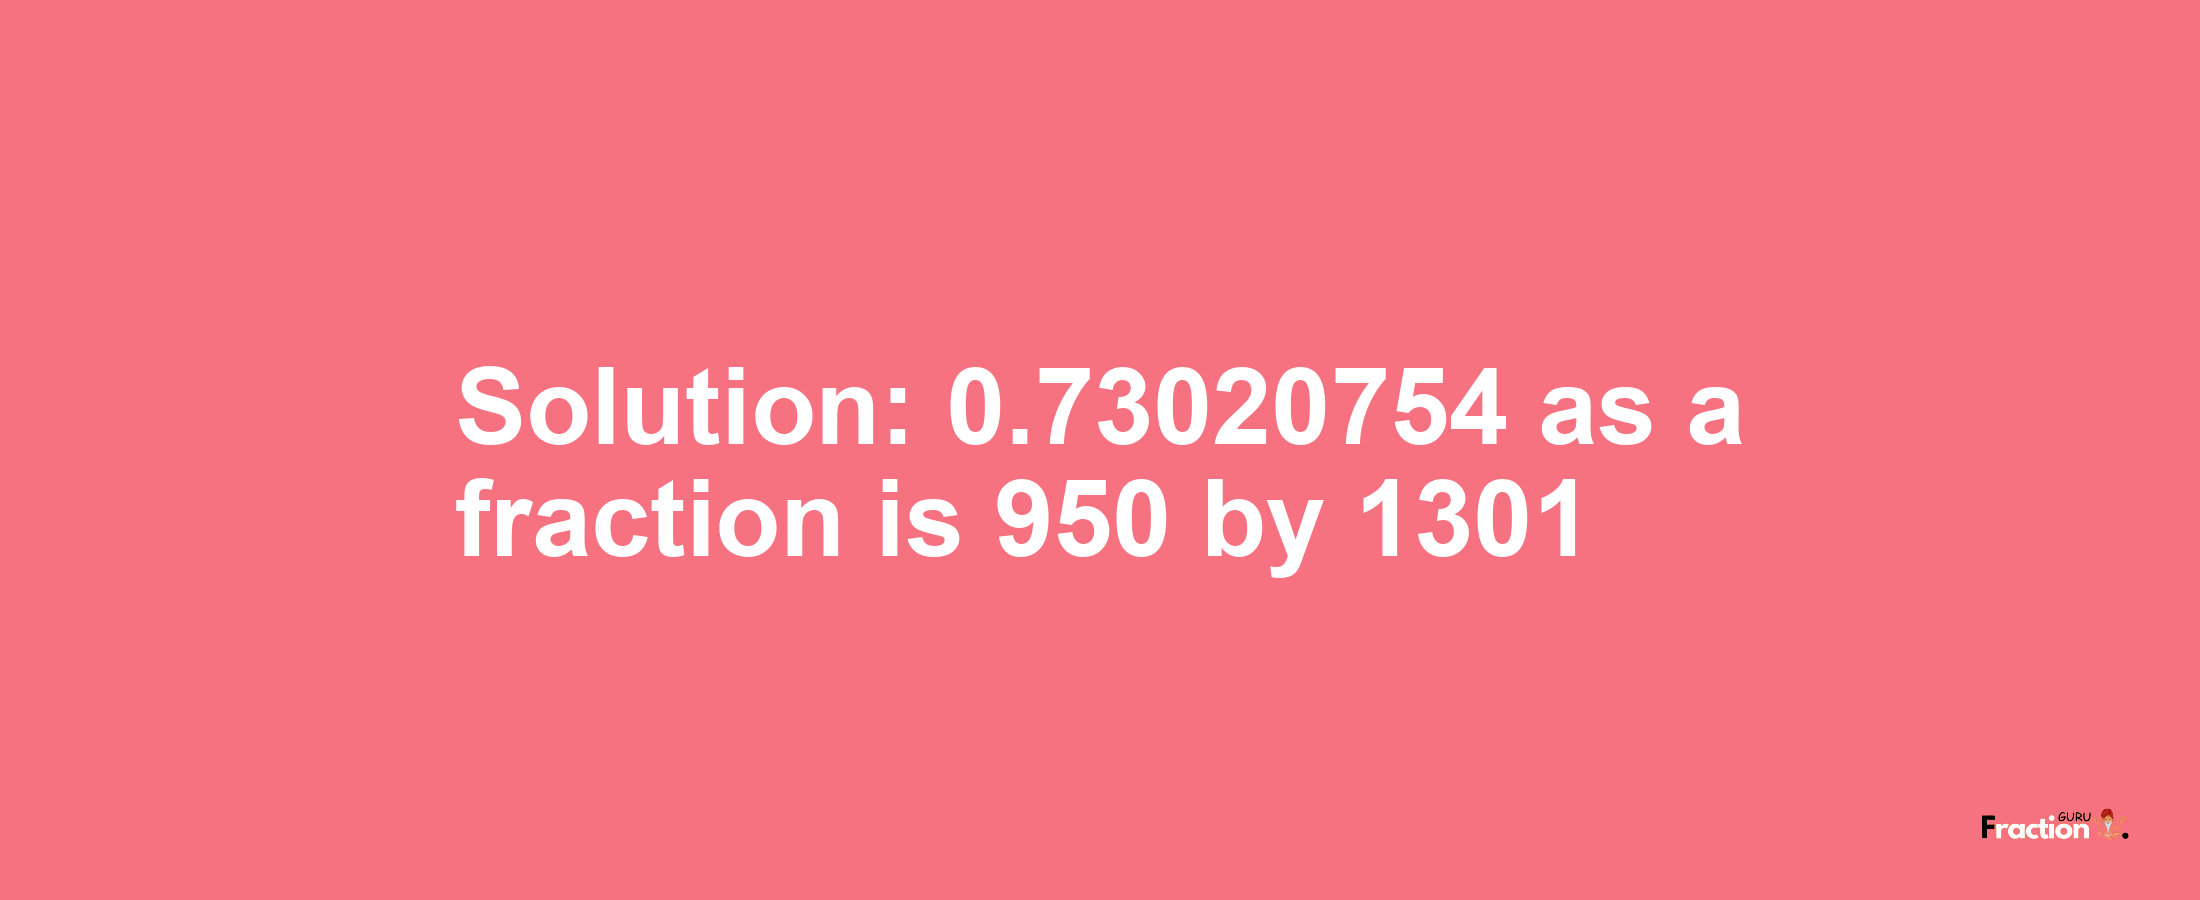 Solution:0.73020754 as a fraction is 950/1301